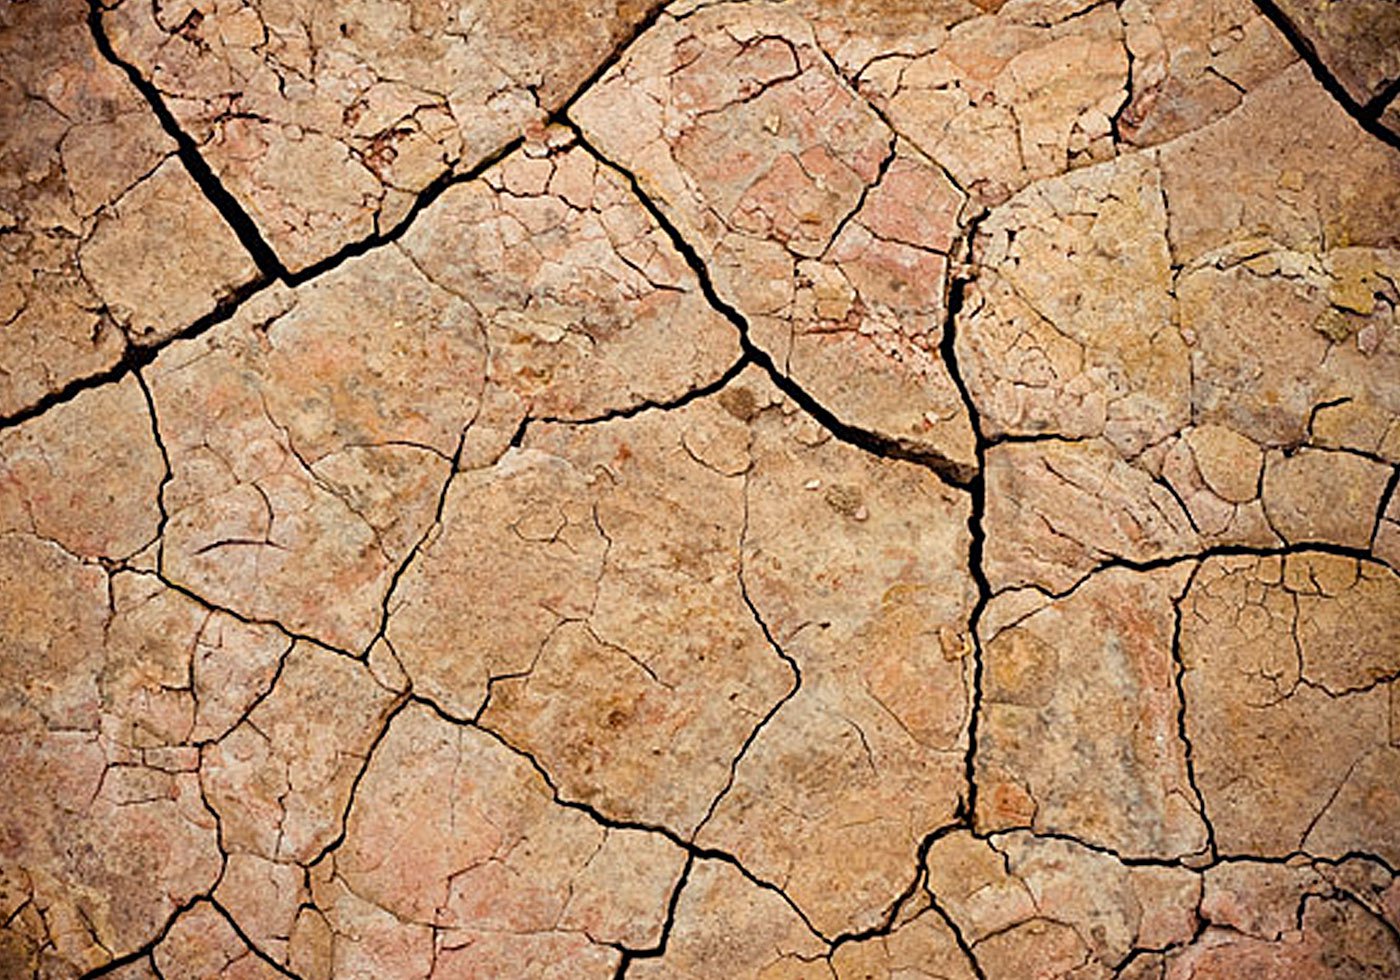 Images of Cracked | 1400x980